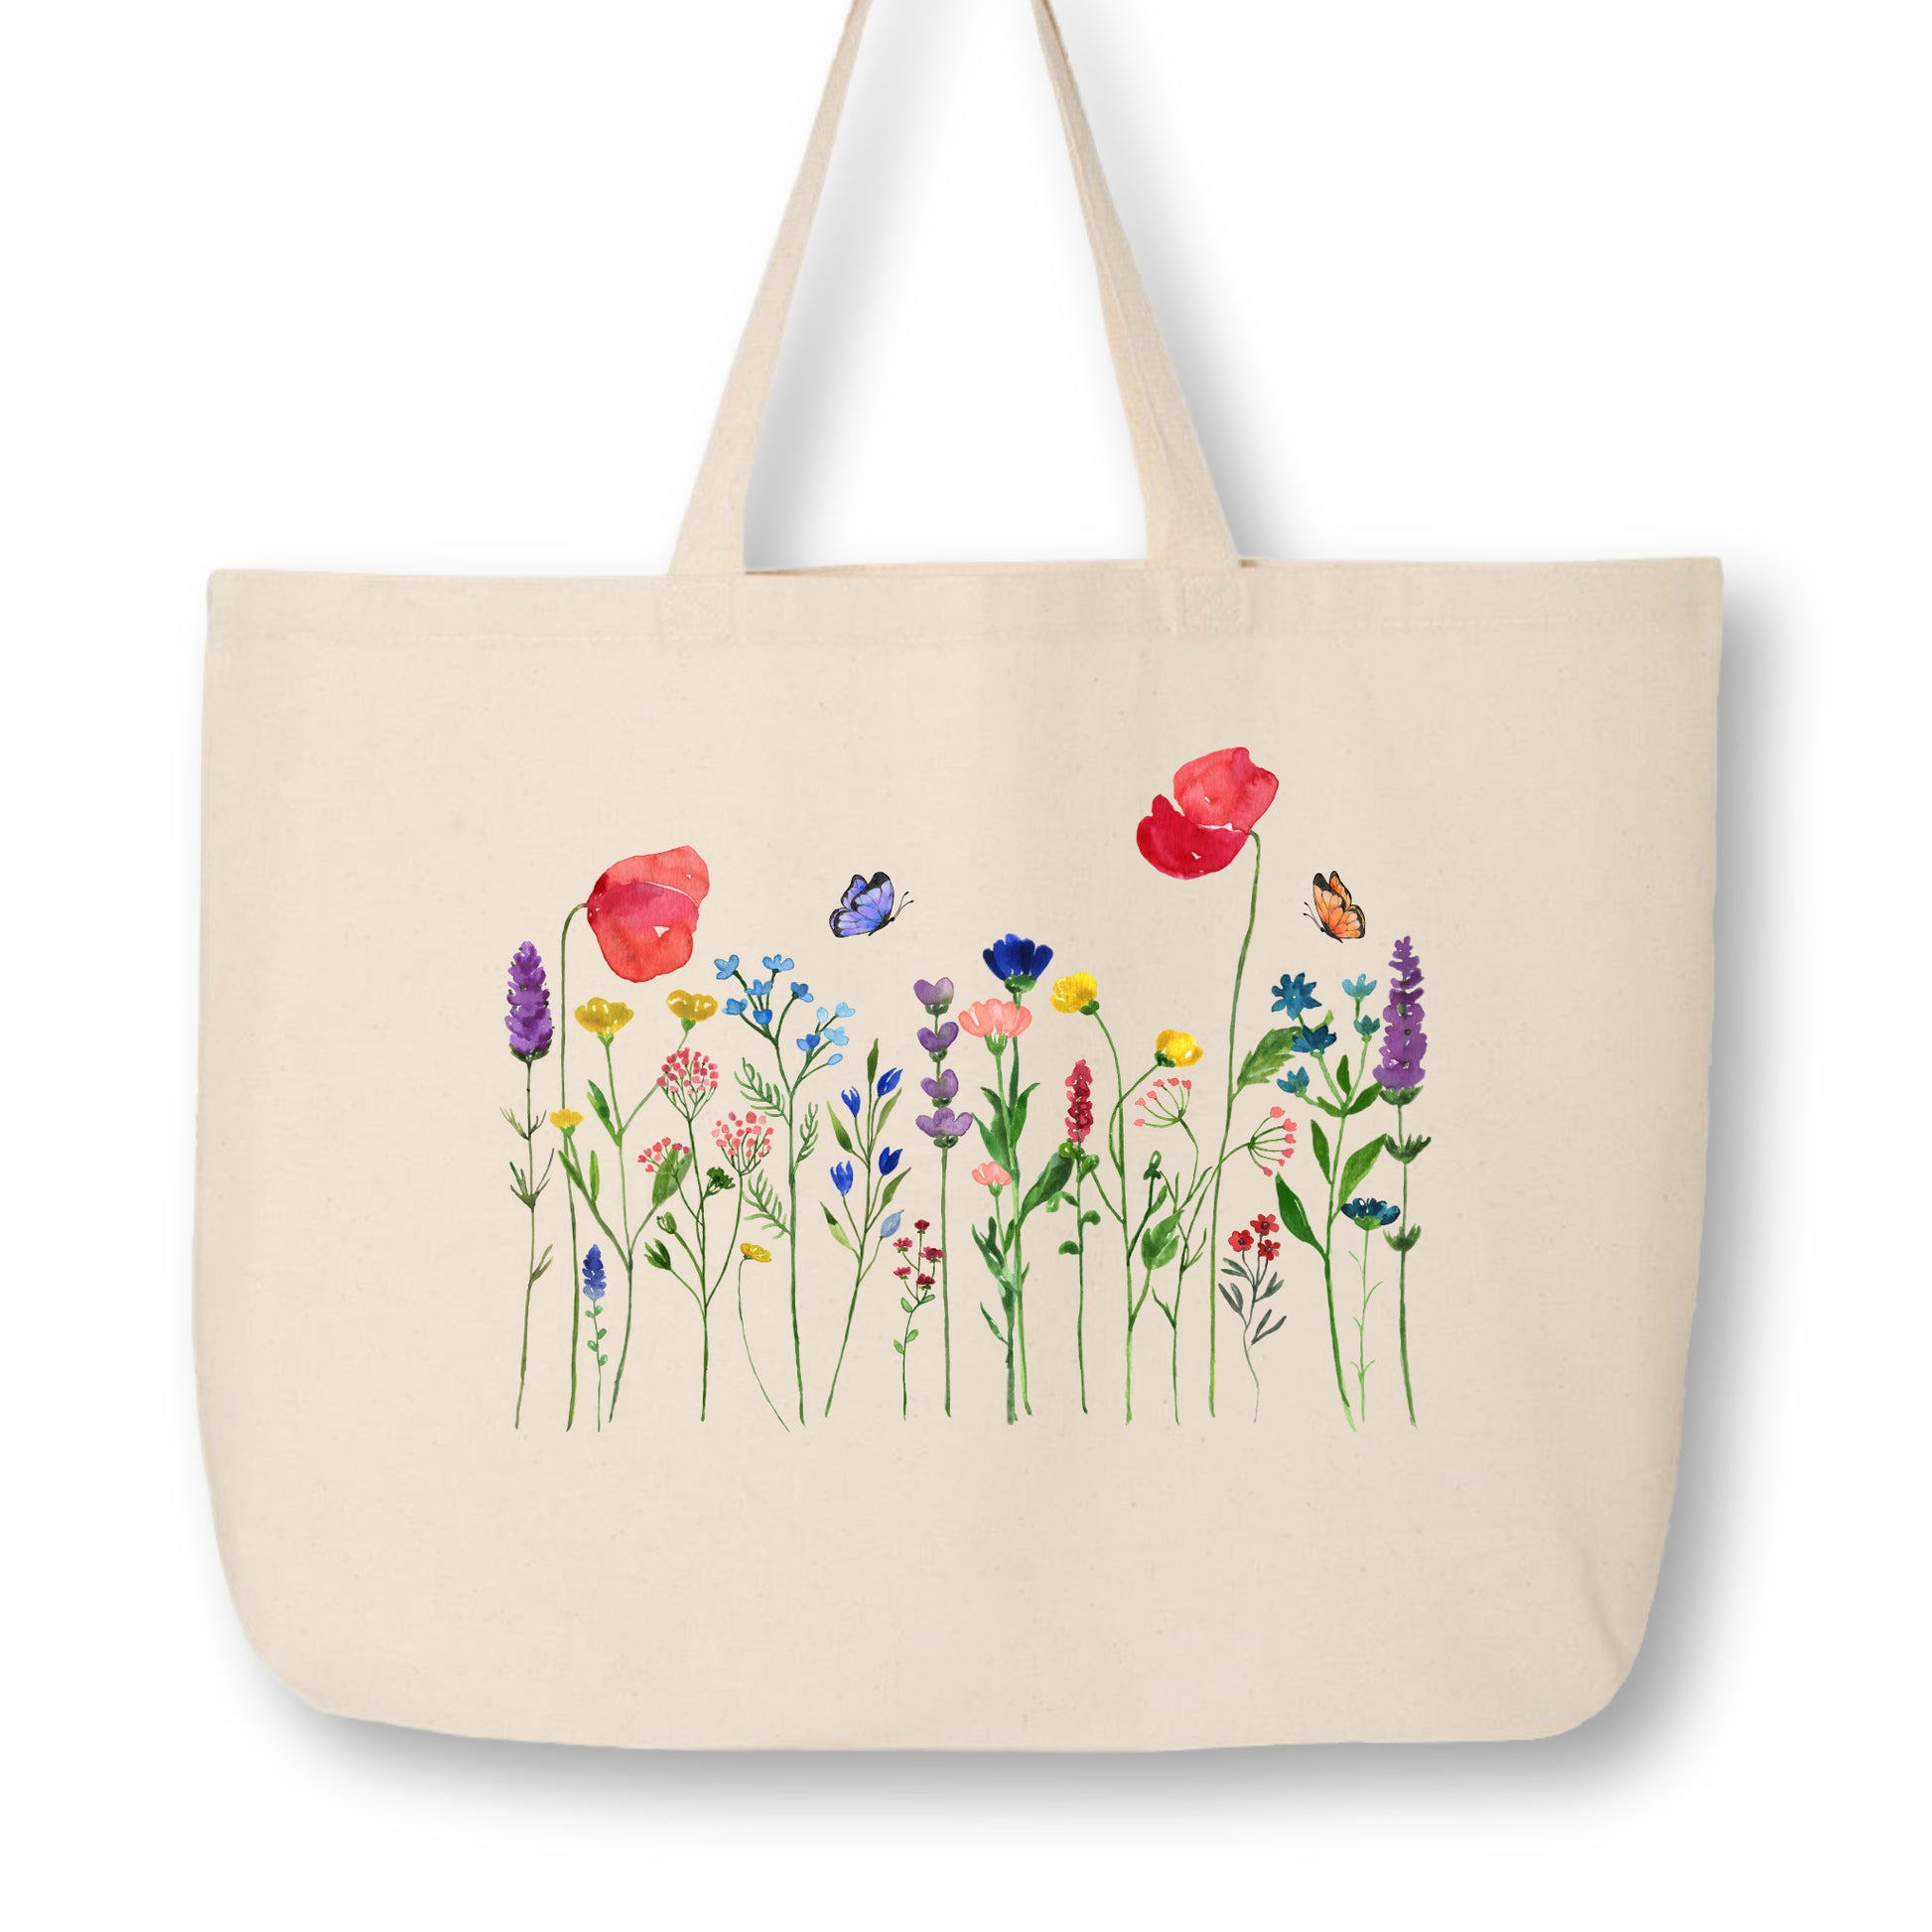 THEYGE Small Flower Tote Bag Aesthetic Floral Canvas Bag Hippie Flower  Cotton Canvas Tote Bag for Women Shopping Shoulder Bag Beach Travel Tote